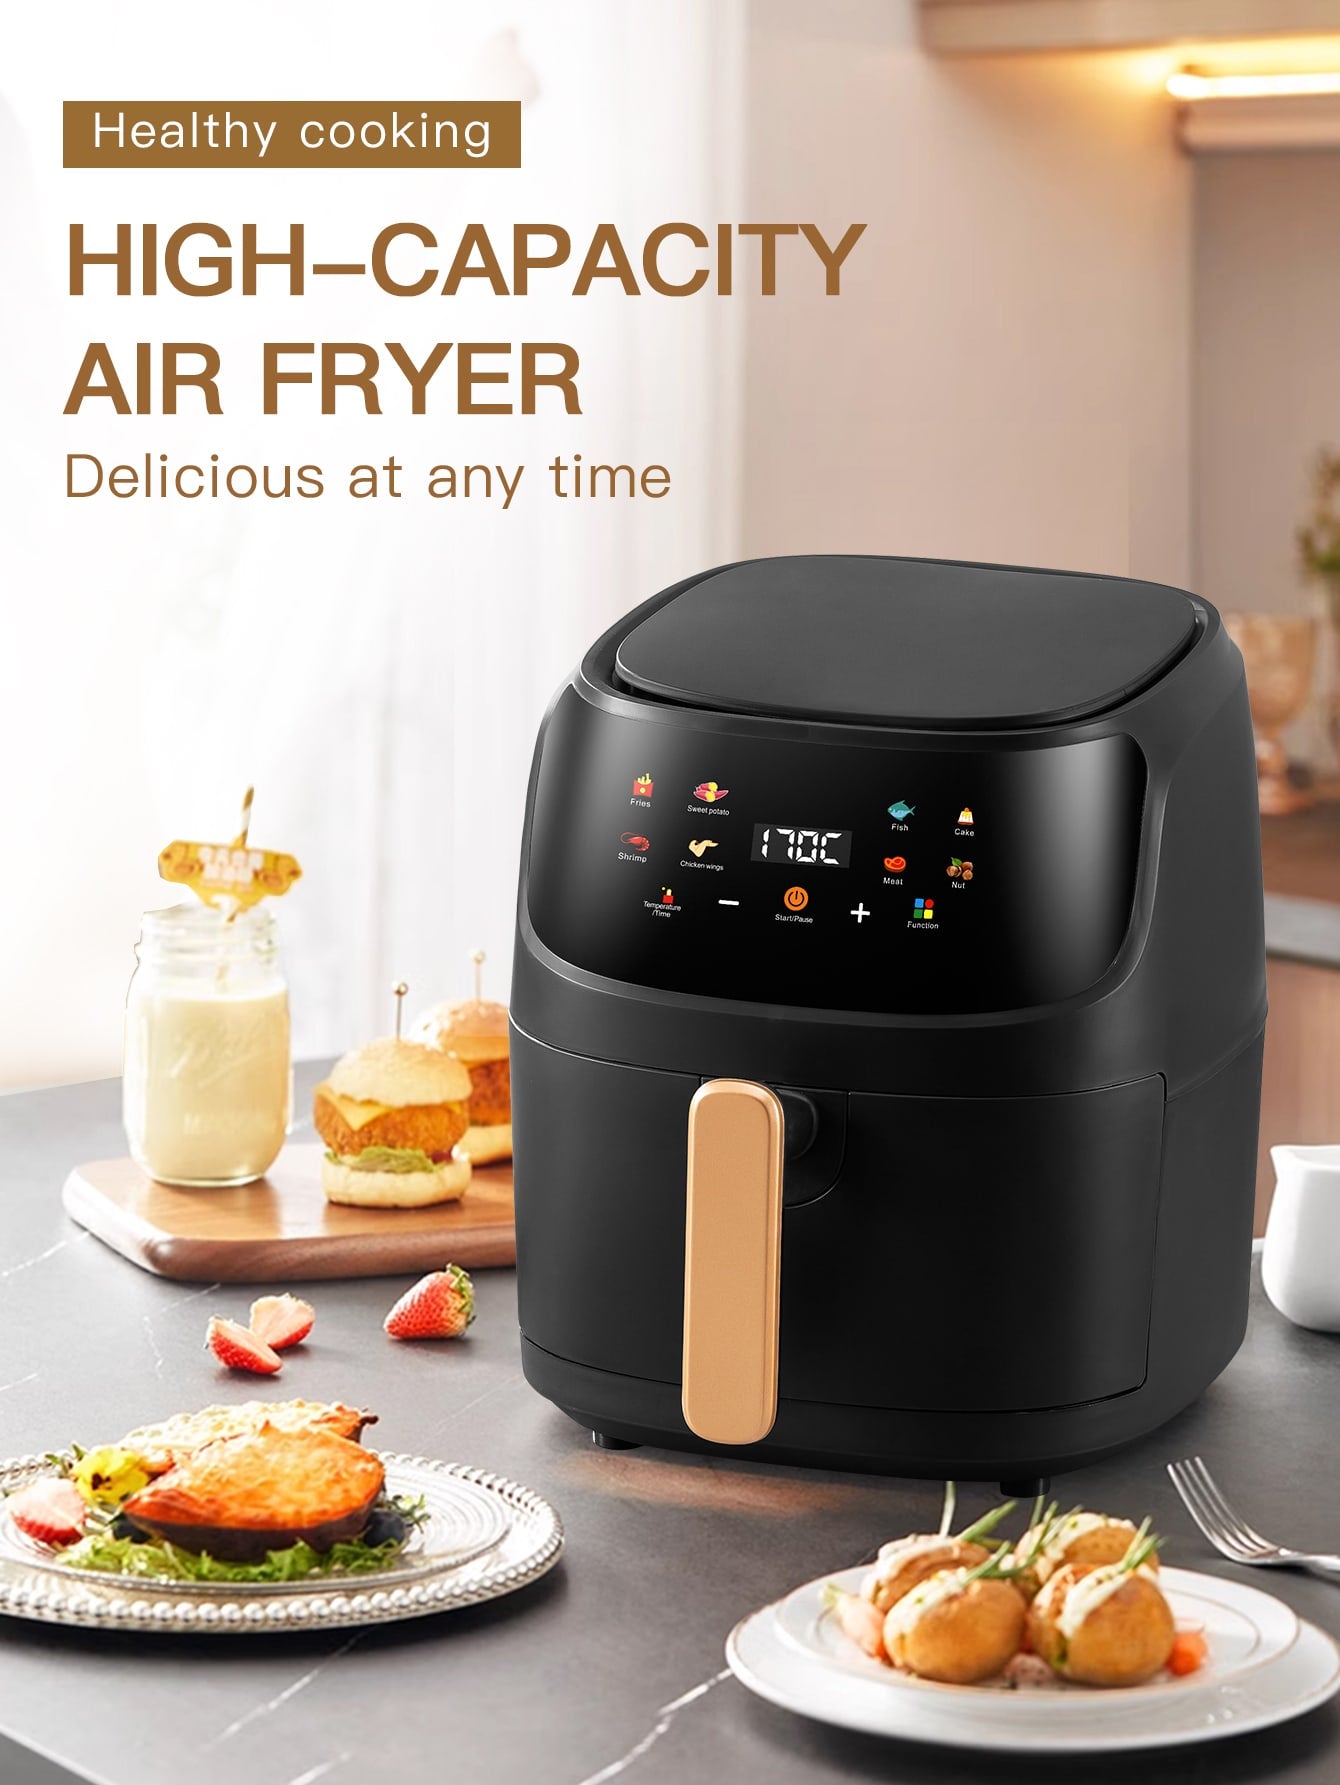 1pc 8l Large Capacity Removable Air Fryer Qf-606, Color Screen One Button Start Non-stick Inner Pot, Multifunctional Grill Machine For Cooking Meat, Chicken Wings, Cakes, Bbq, Home Use-Black-1